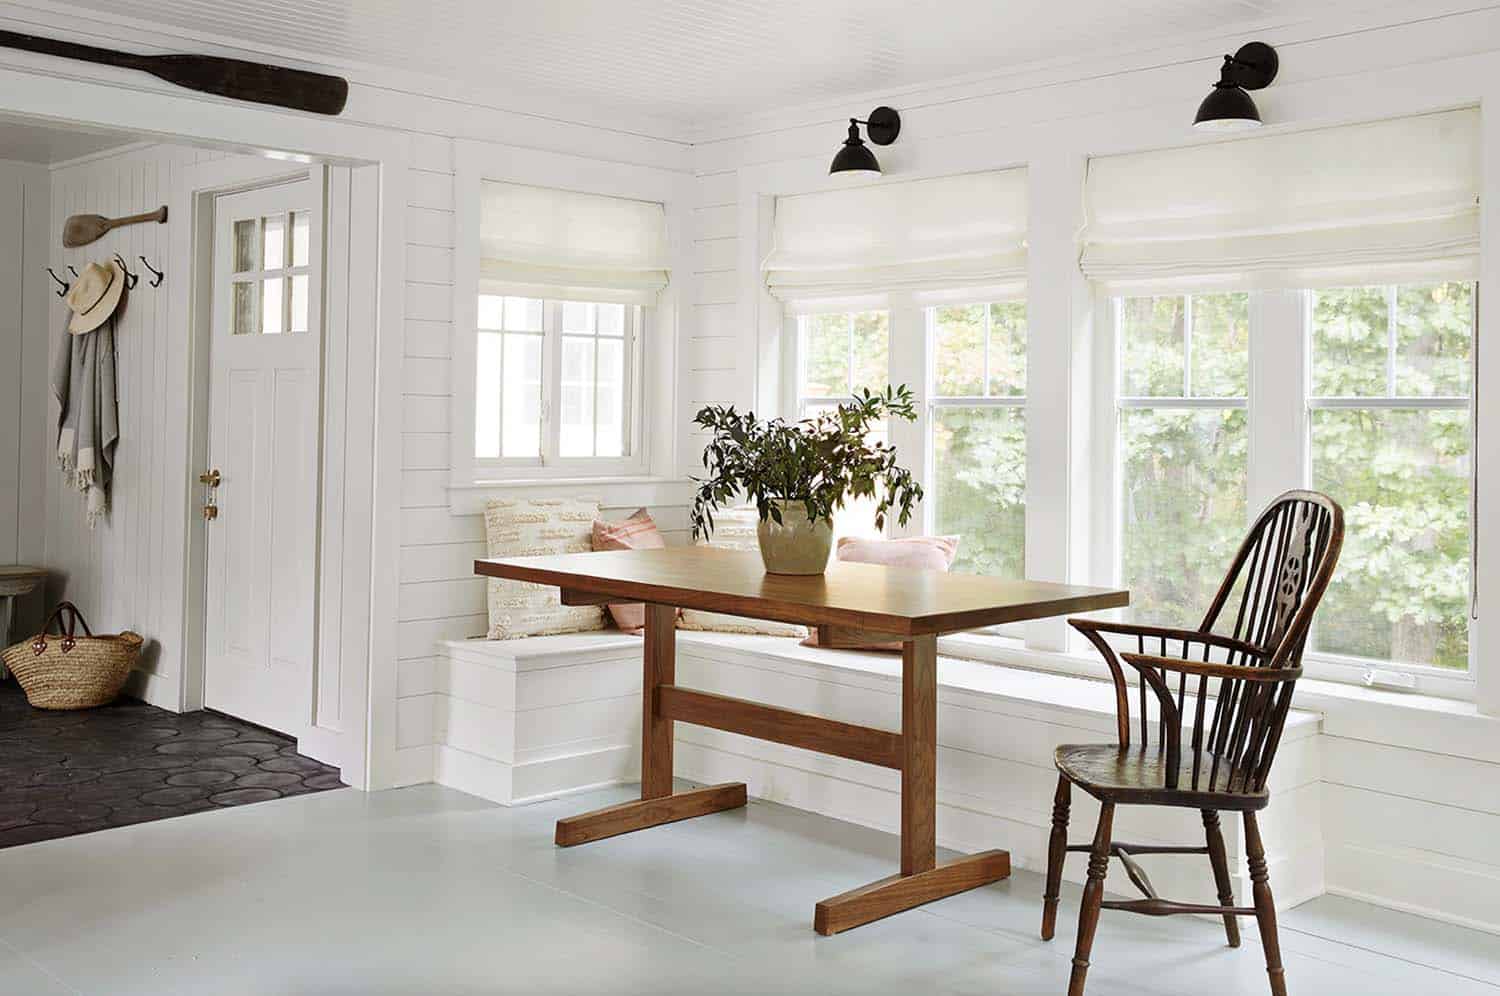 beach style home entry and breakfast banquette with a large window